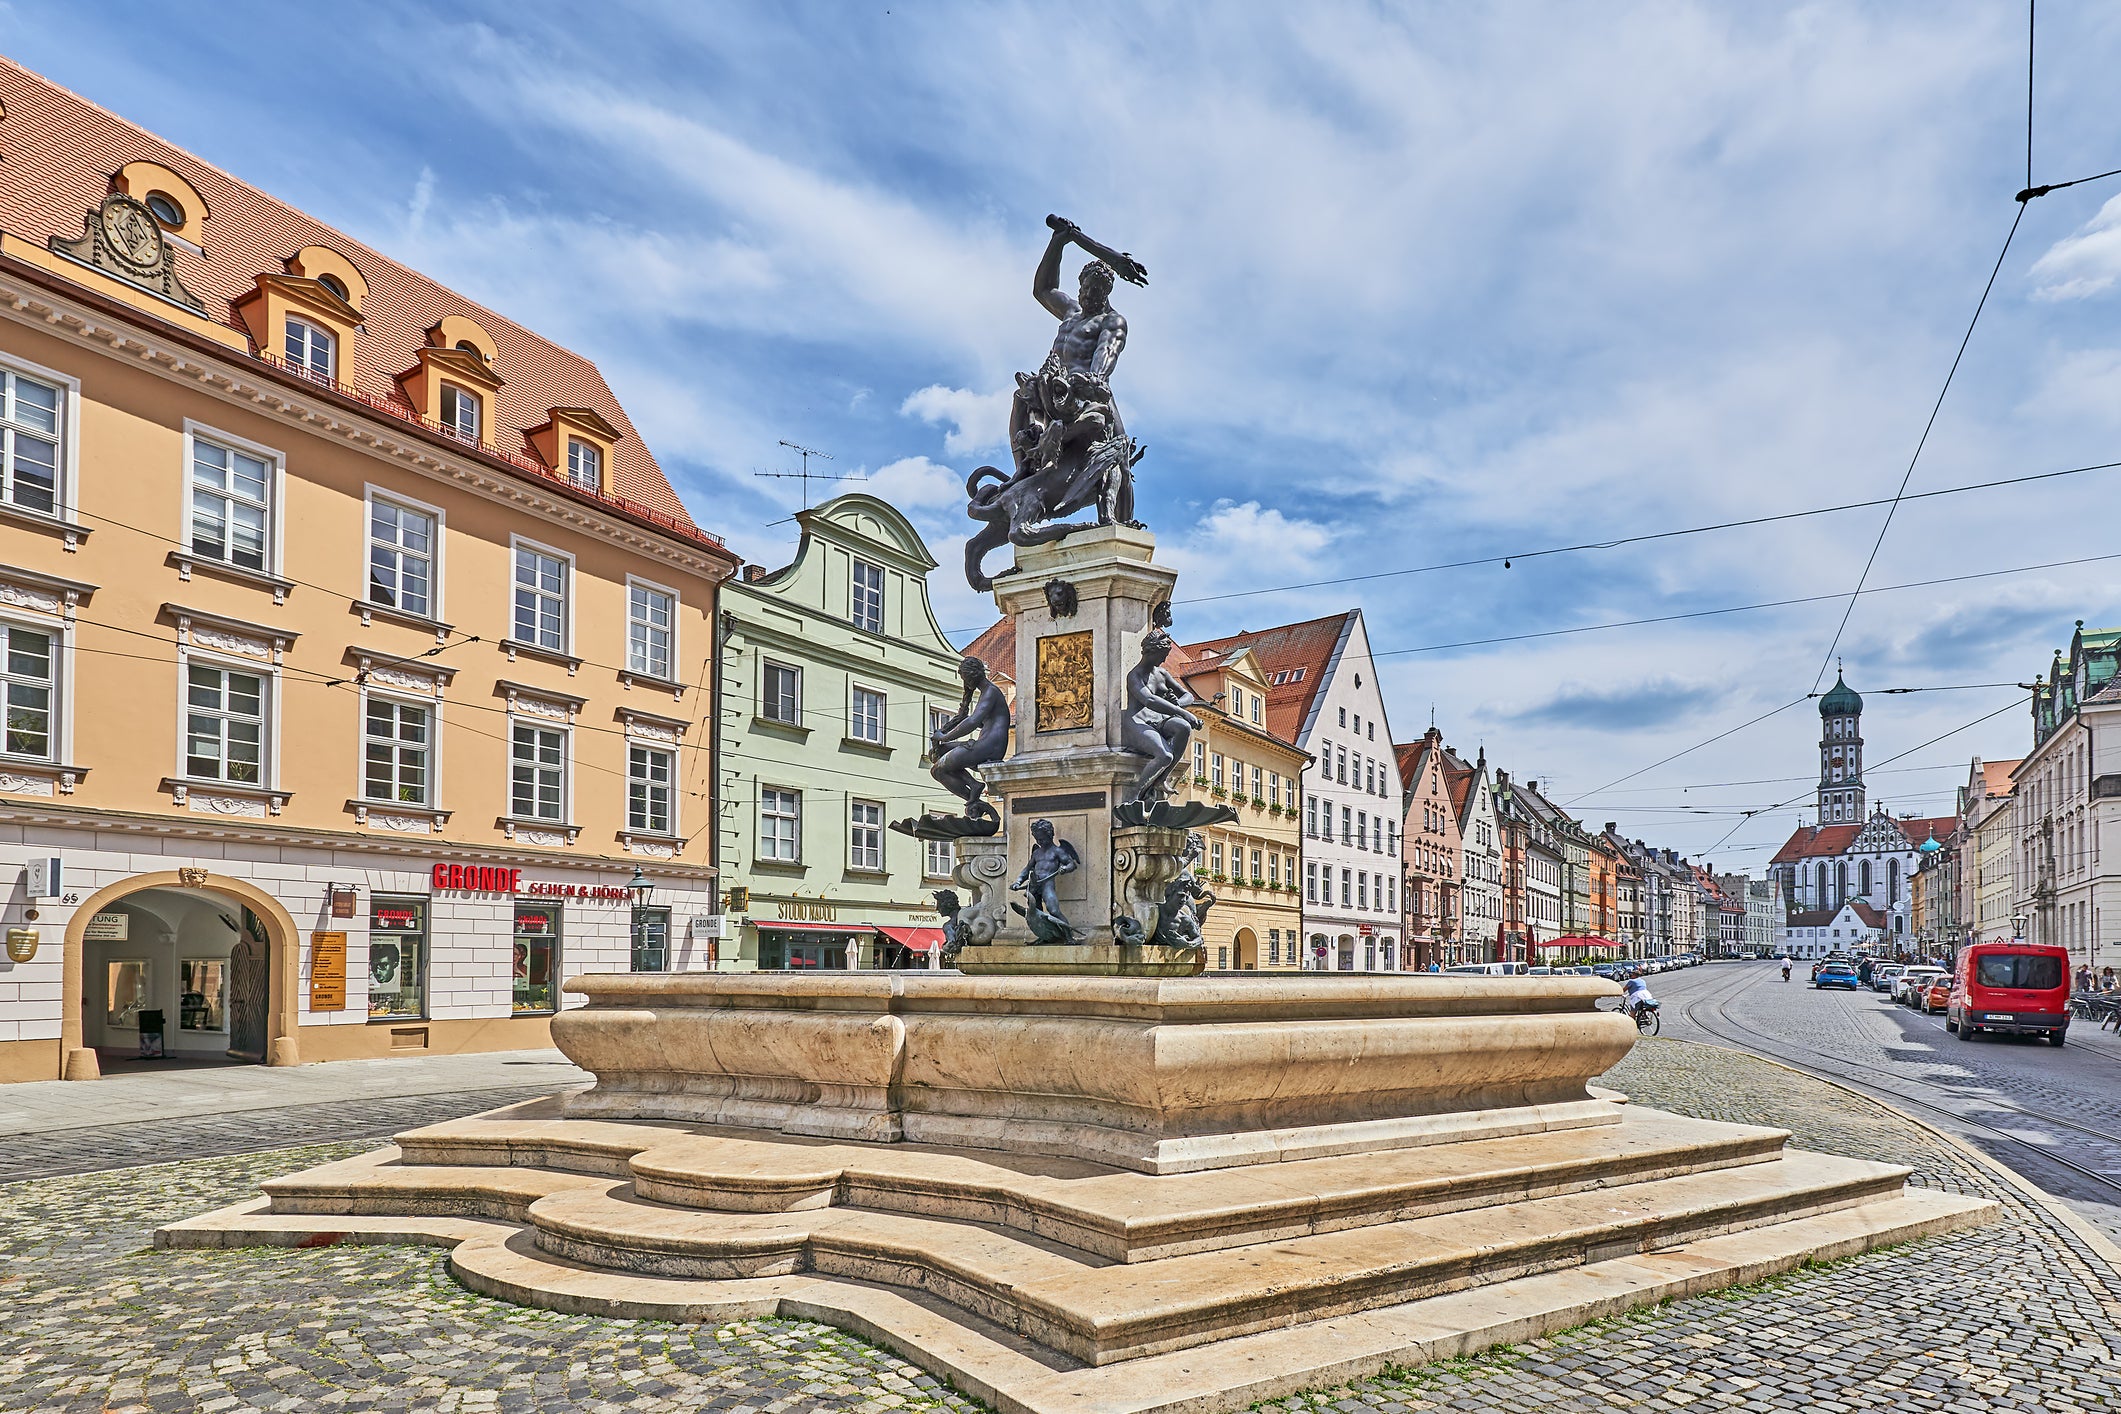 Around 30 miles west of Munich, Augsburg has been charming travellers for centuries